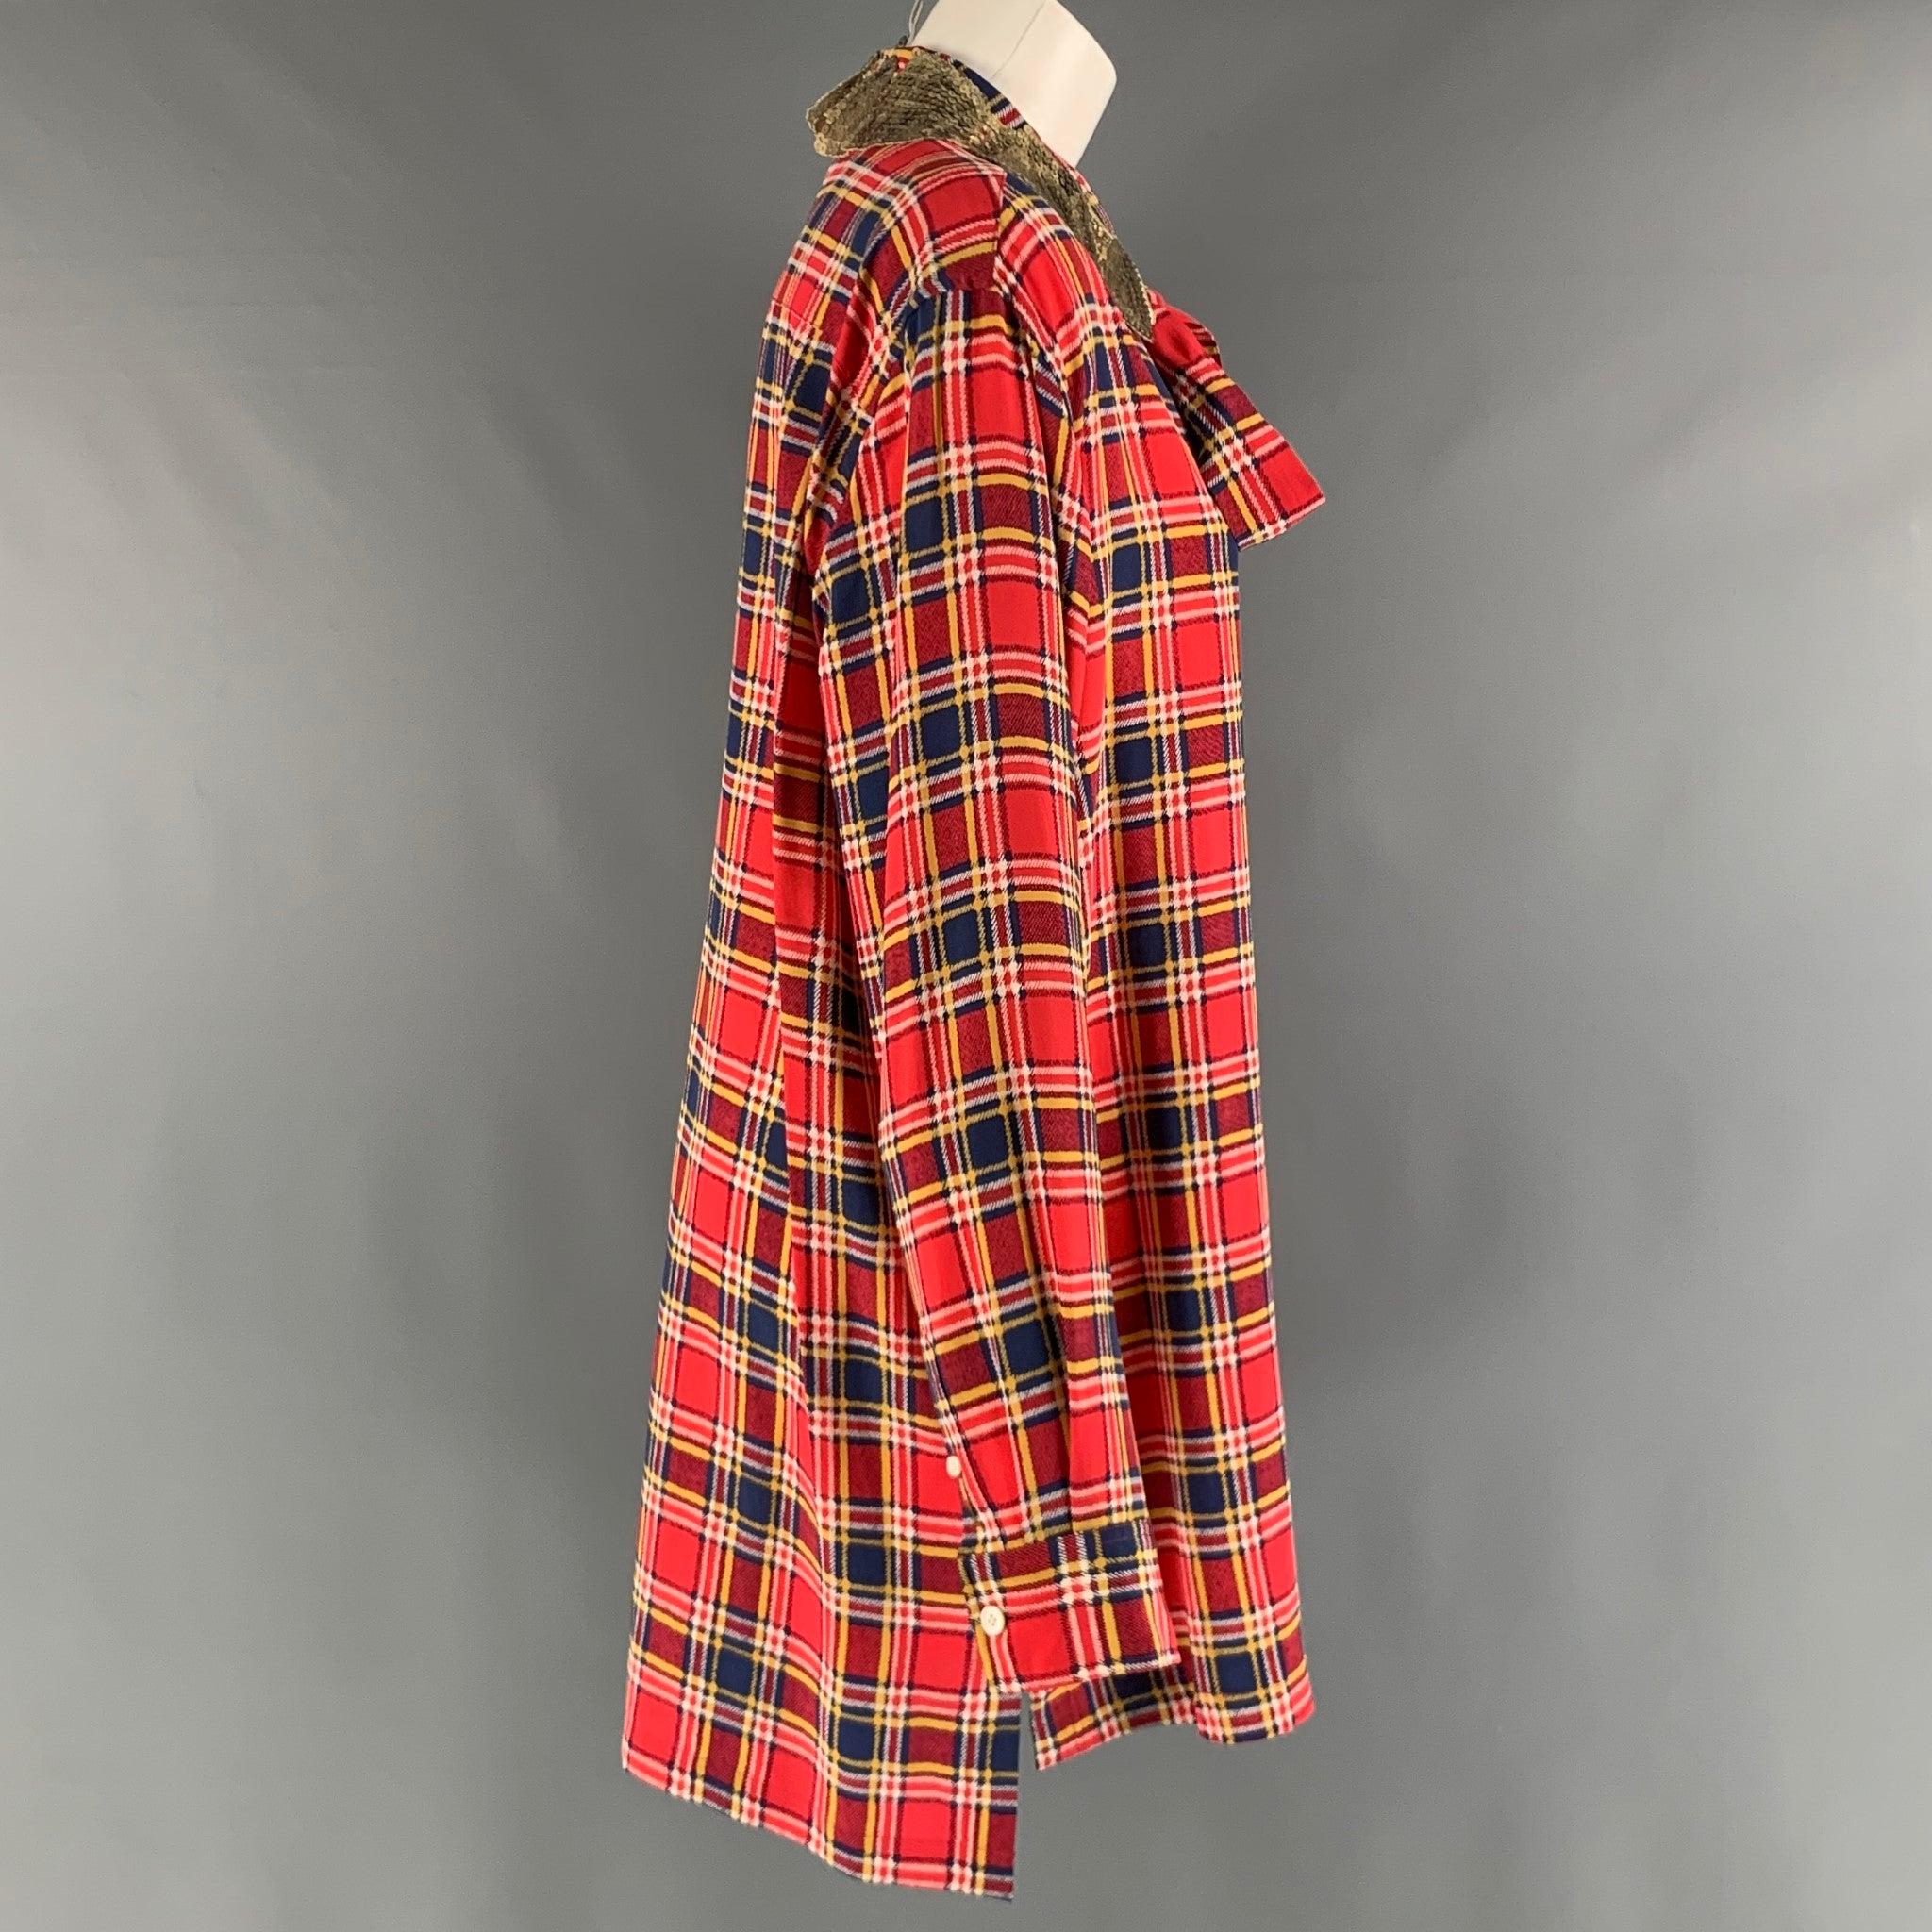 MARC JACOBS Size 8 Red Yellow/Blue Silk Plaid Long Shirt In Excellent Condition For Sale In San Francisco, CA